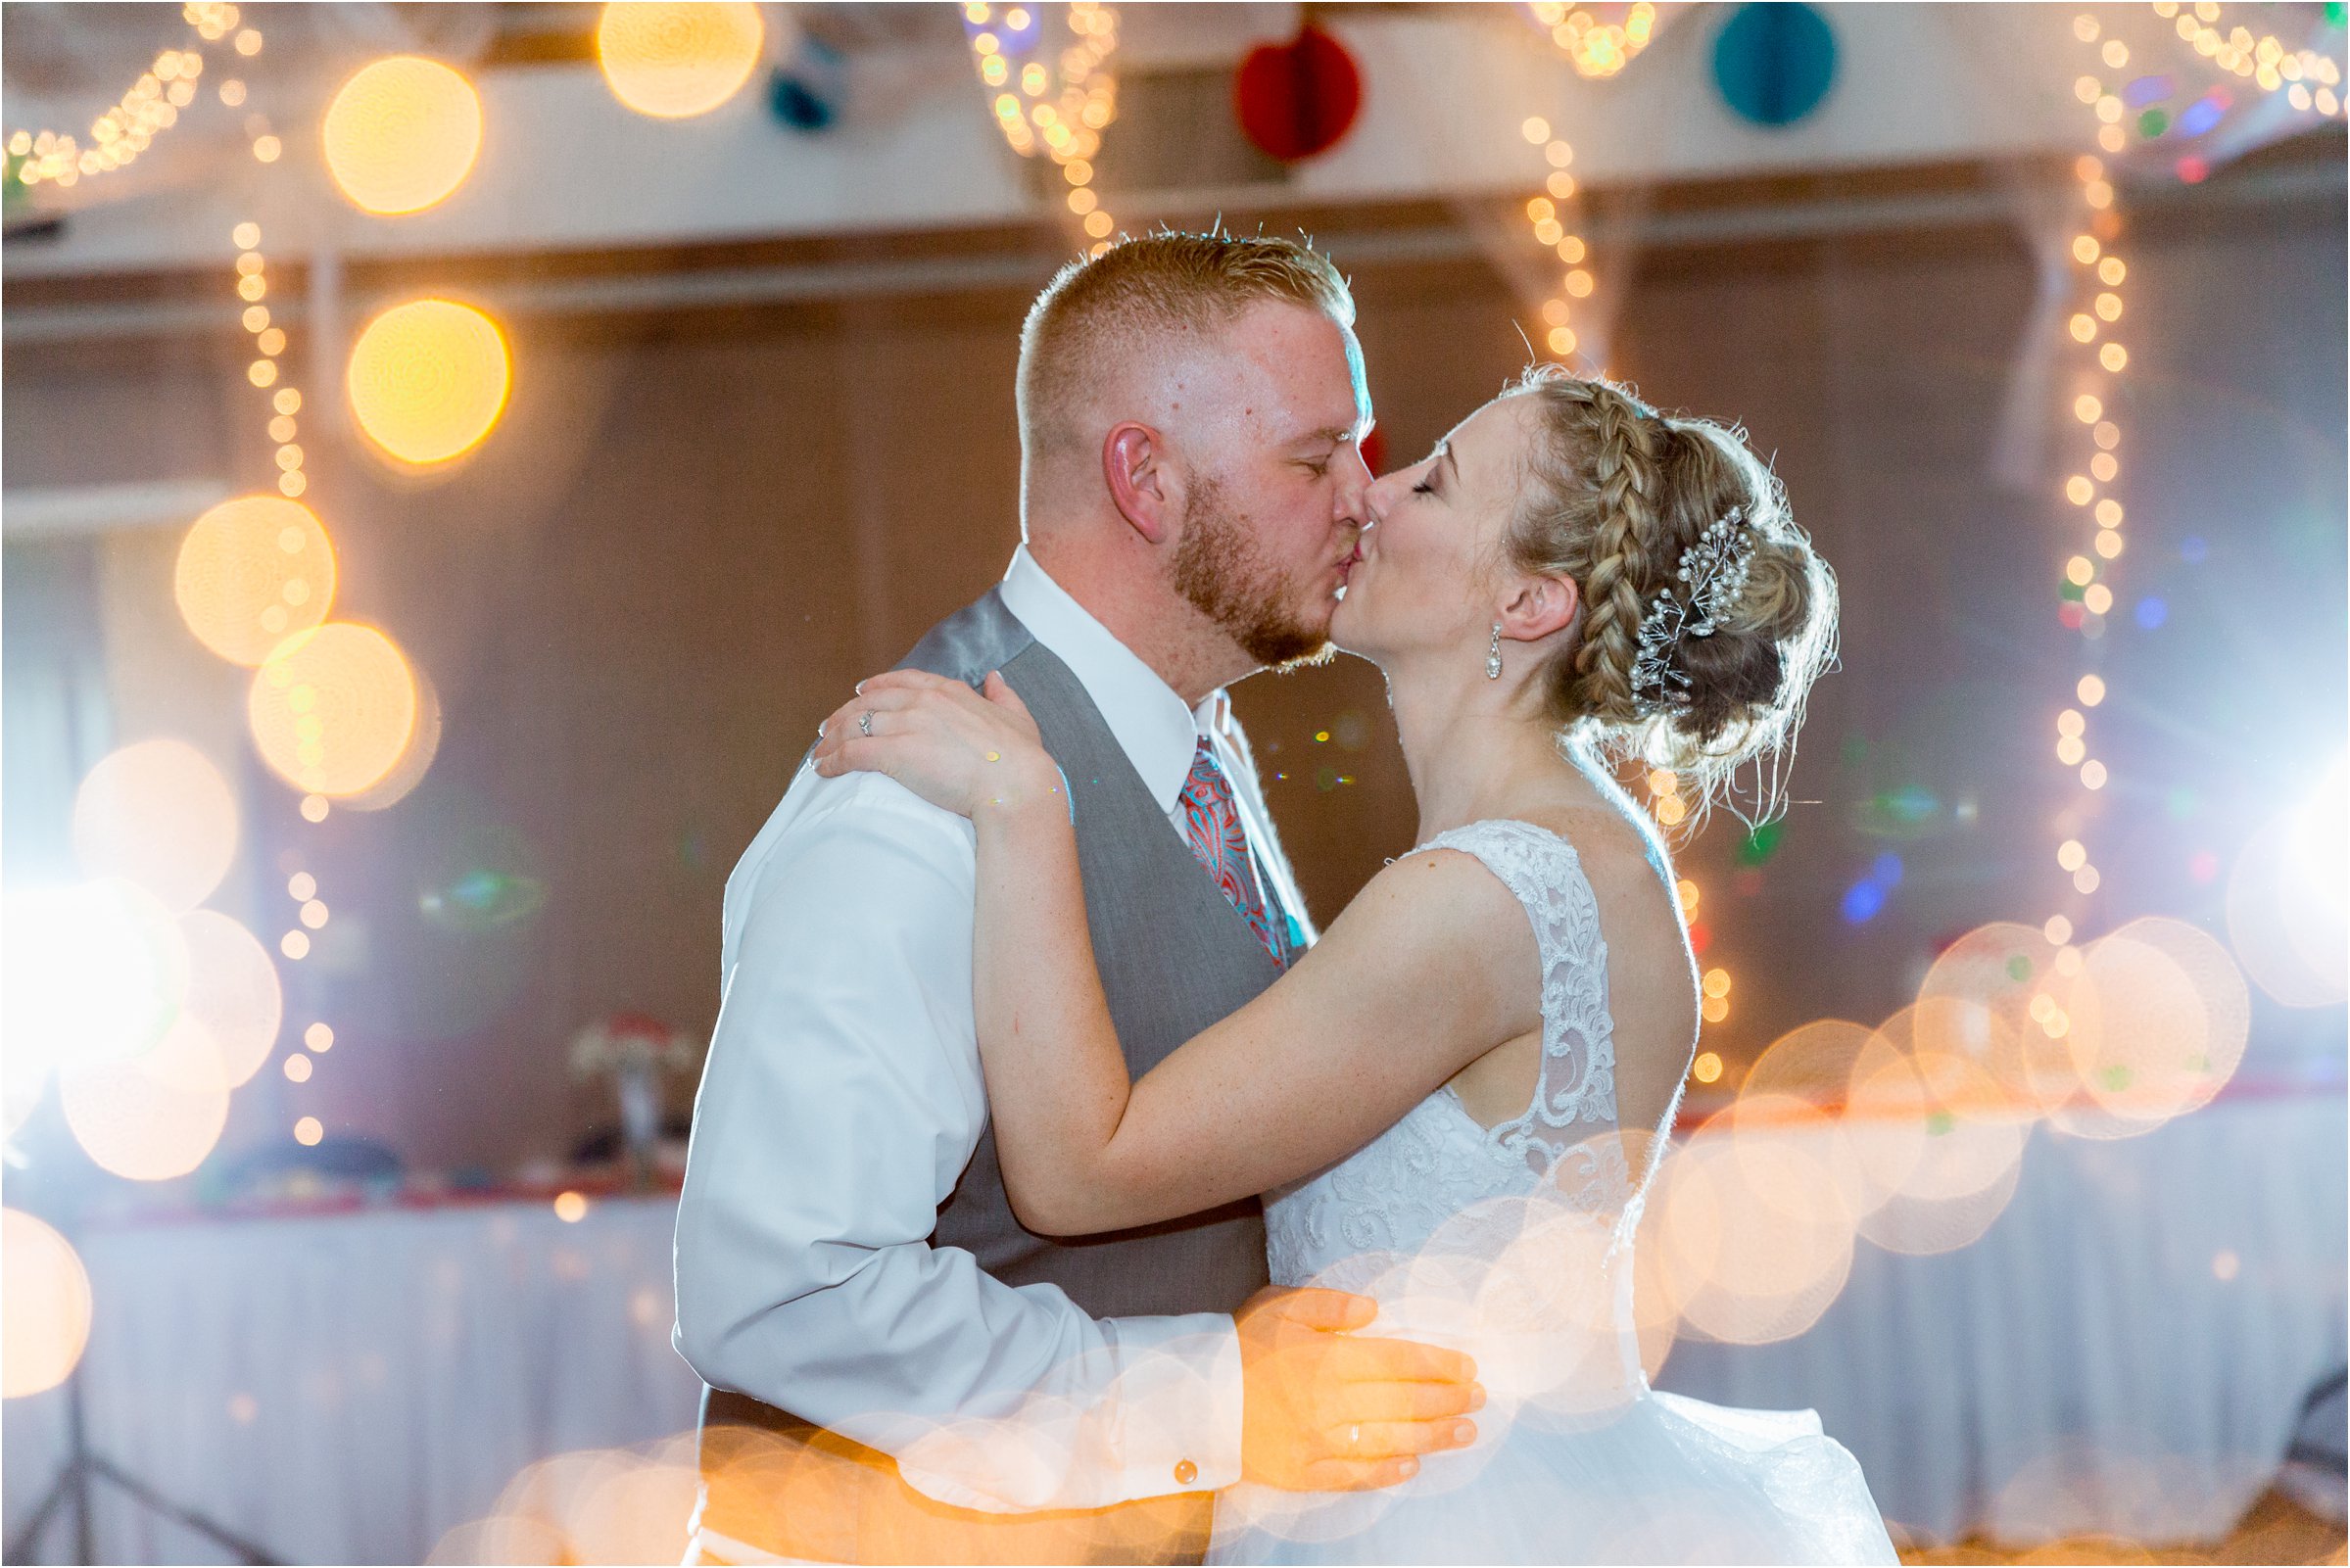 bride and groom kiss under lights at their wedding reception